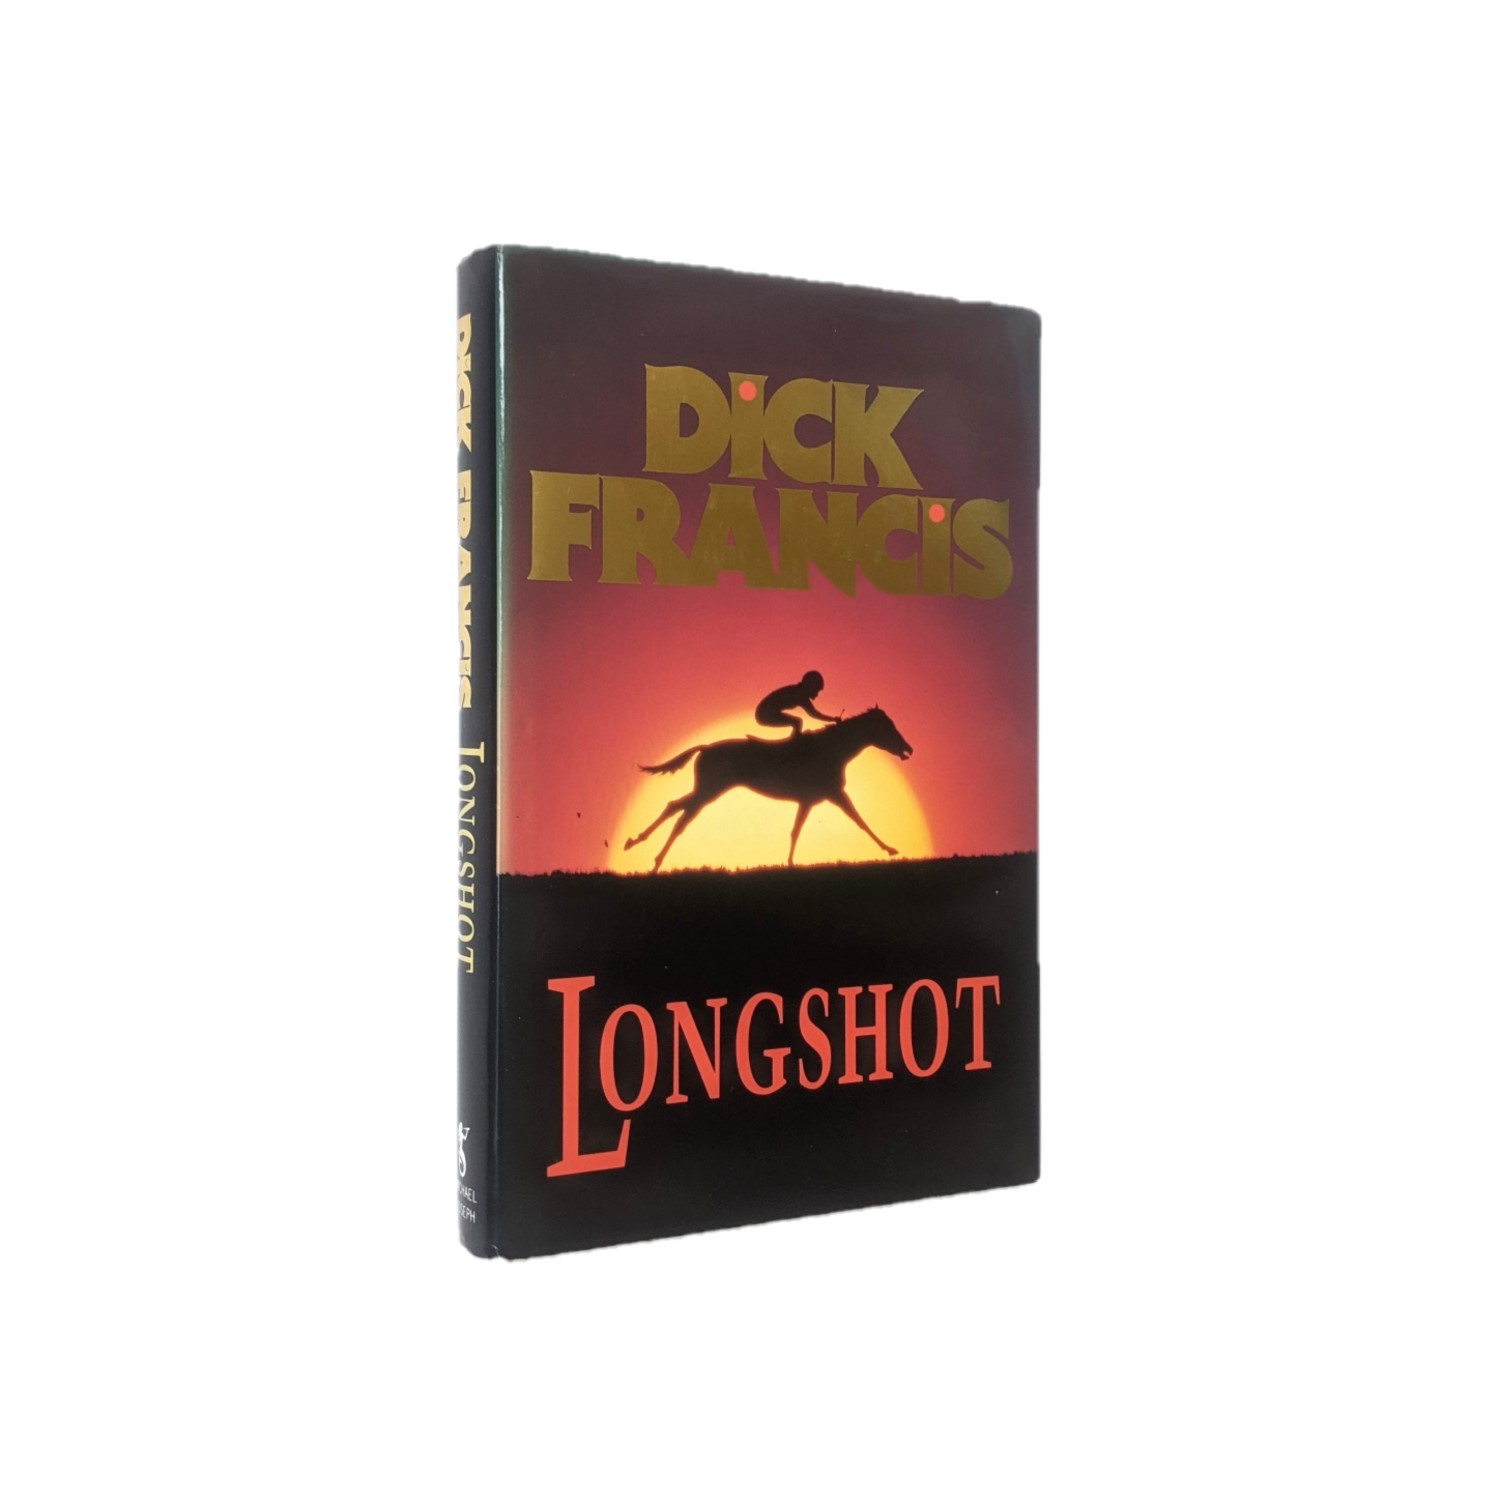 Longshot Signed Dick Francis By Dick Francis Fine Hardcover 1990 1st Edition Signed By